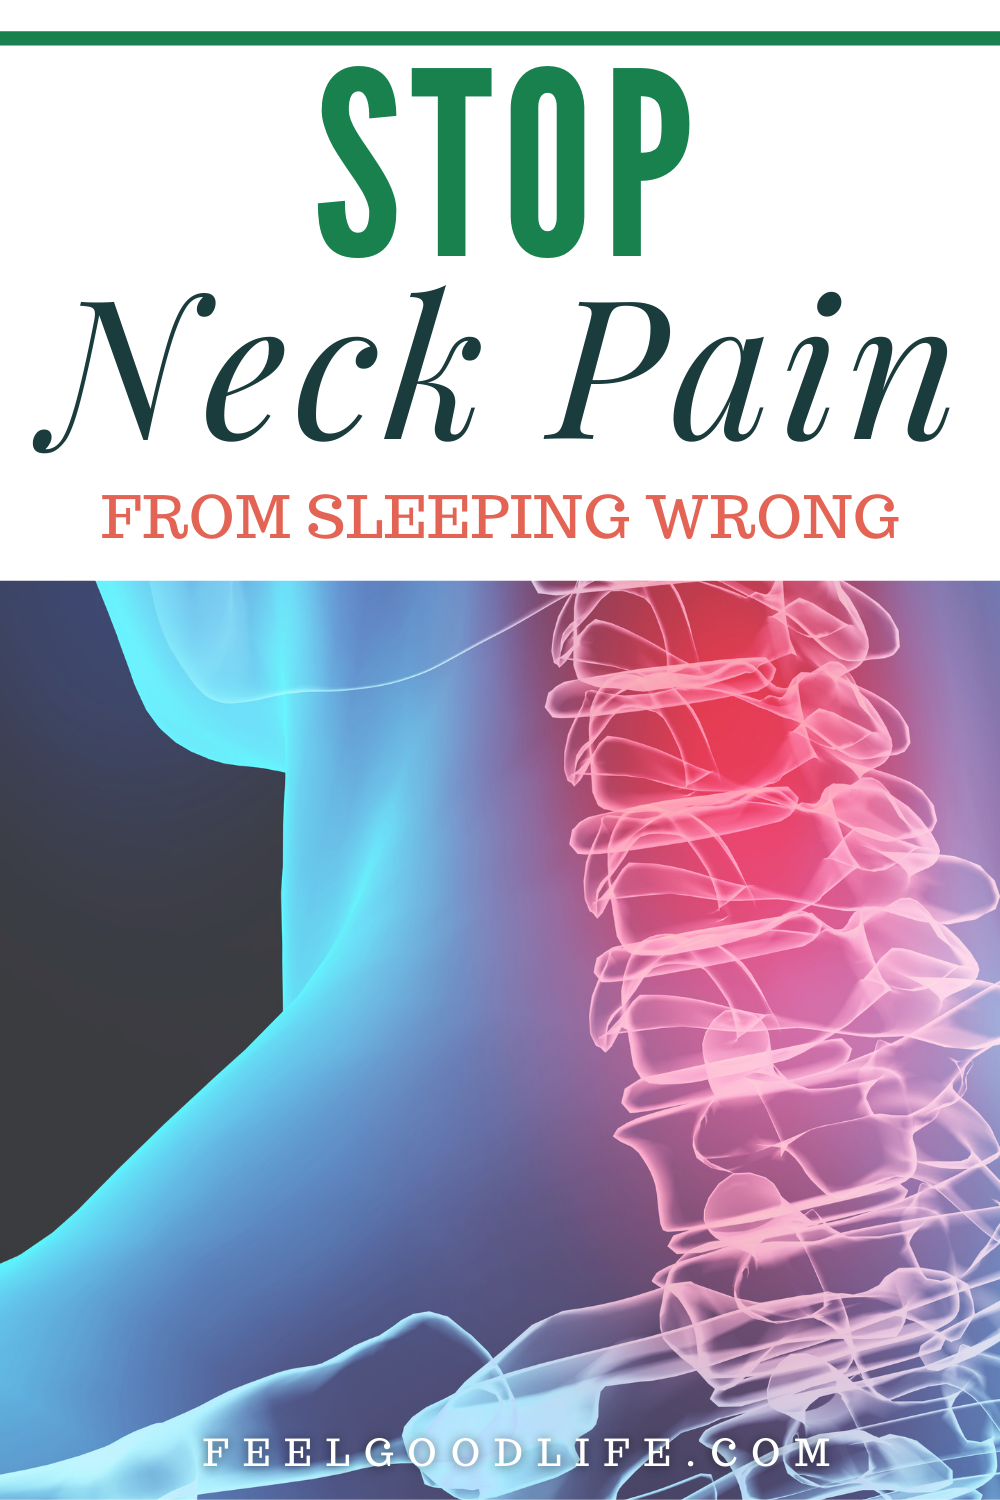 The Easy Way To Stop Neck Pain From Sleeping Wrong | Feel Good Life